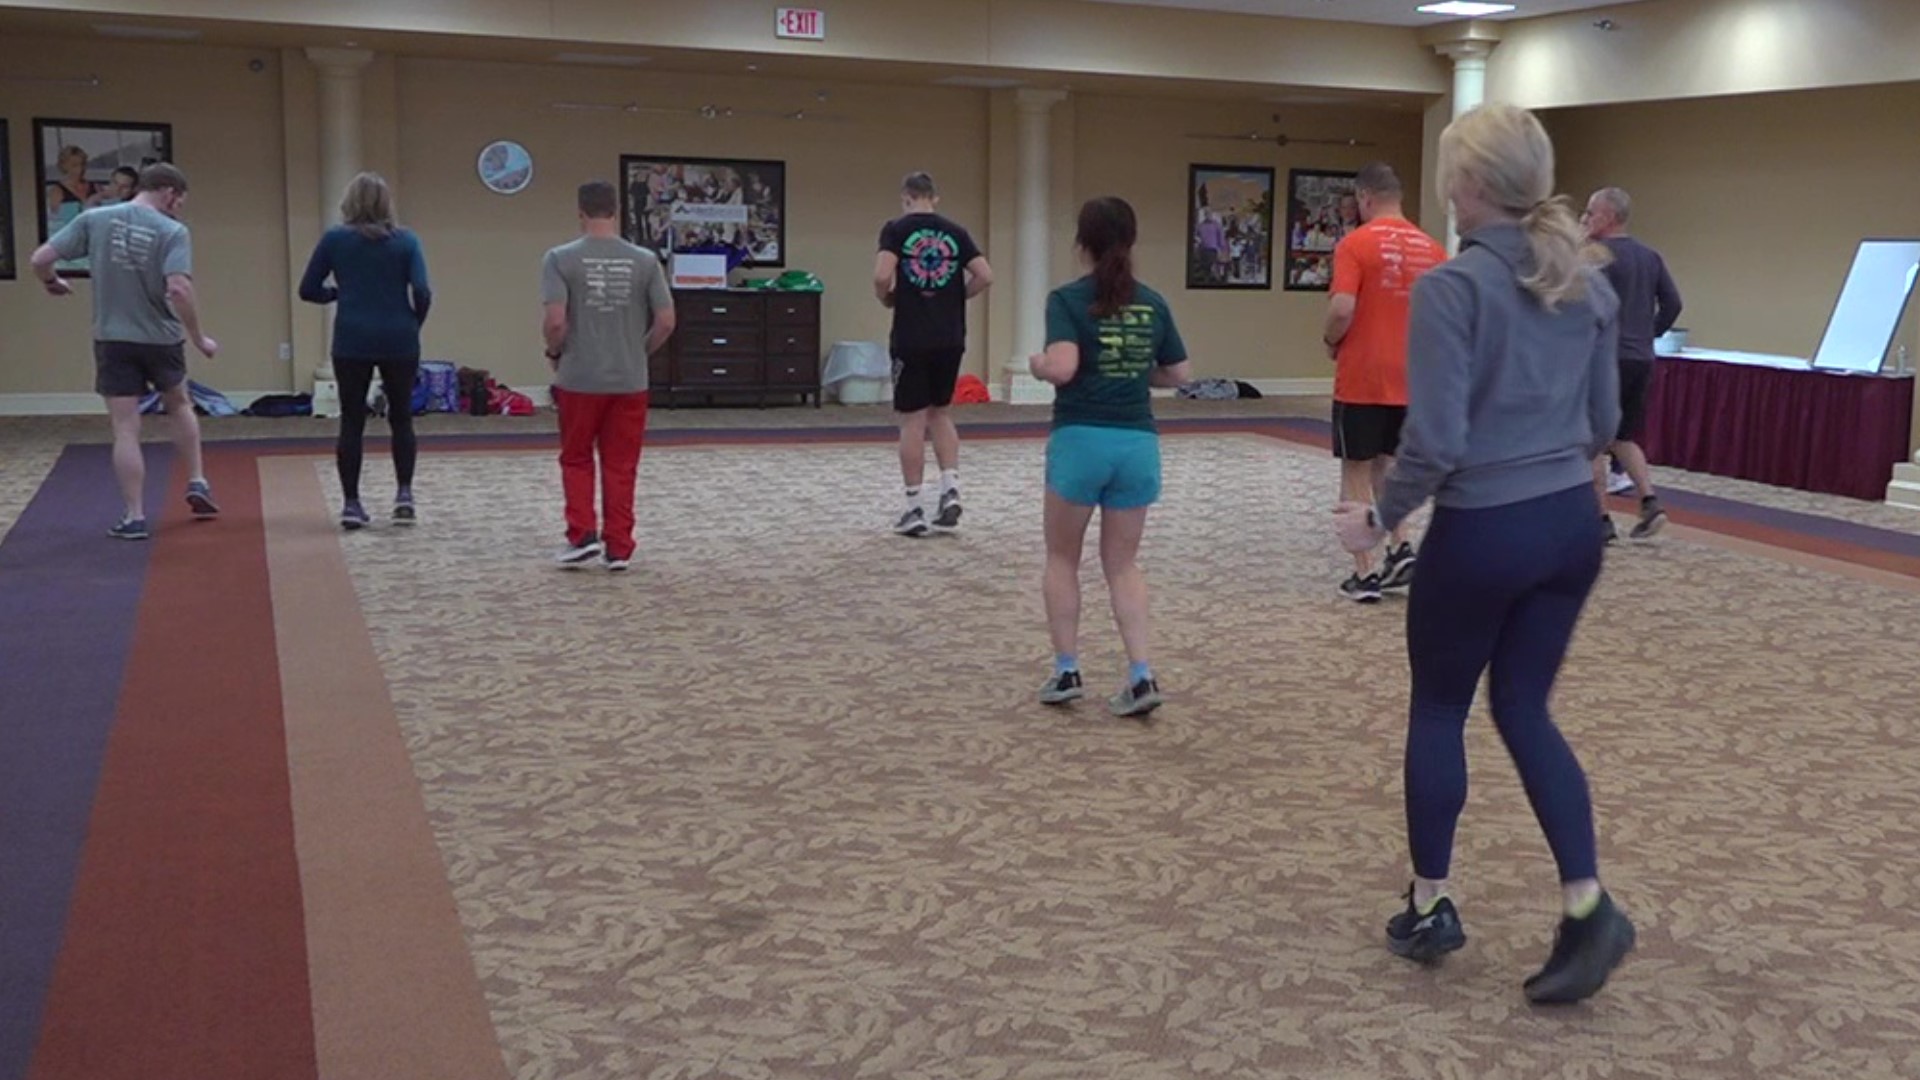 In running,  just like any sport, there's always room for improvement. Newswatch 16's Chelsea Strub checks out a running seminar in Lackawanna County.